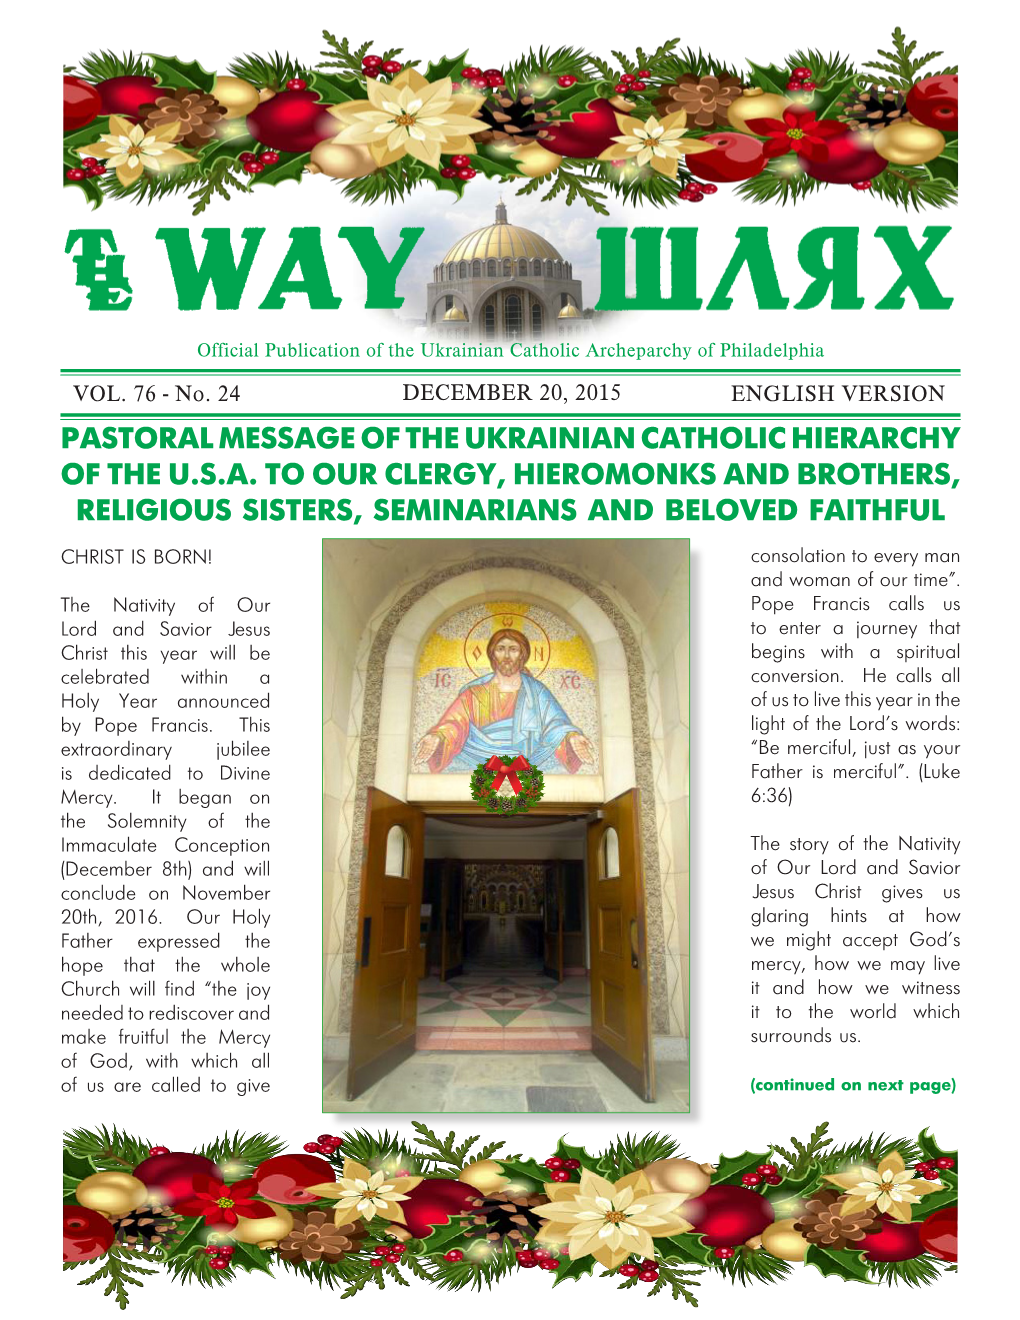 Pastoral Message of the Ukrainian Catholic Hierarchy of the U.S.A